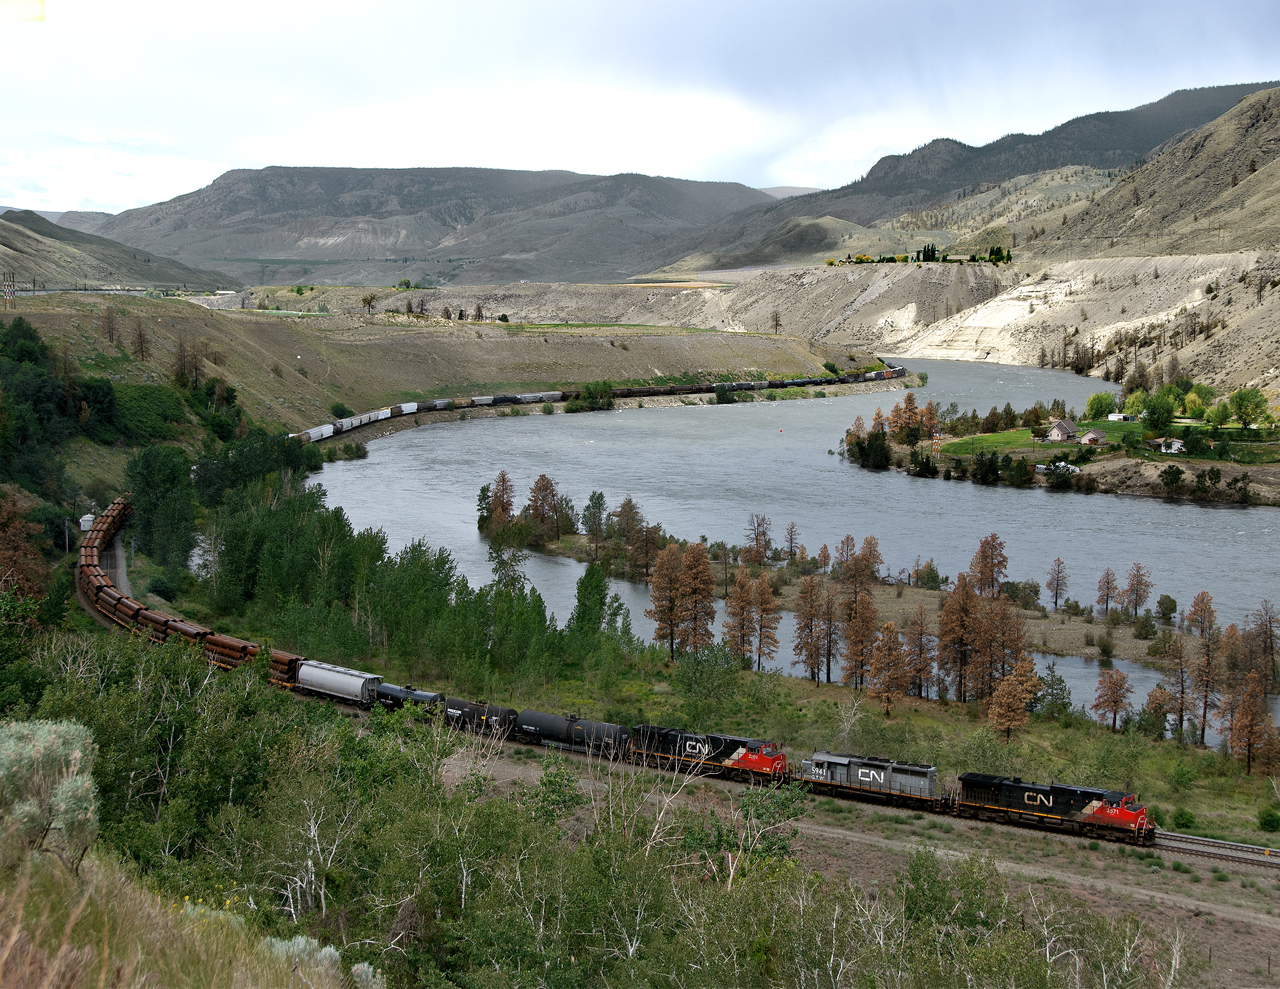 Eastbound mixed merchandise train 300 ain the semi arid Thompson River valley west of Kamloops